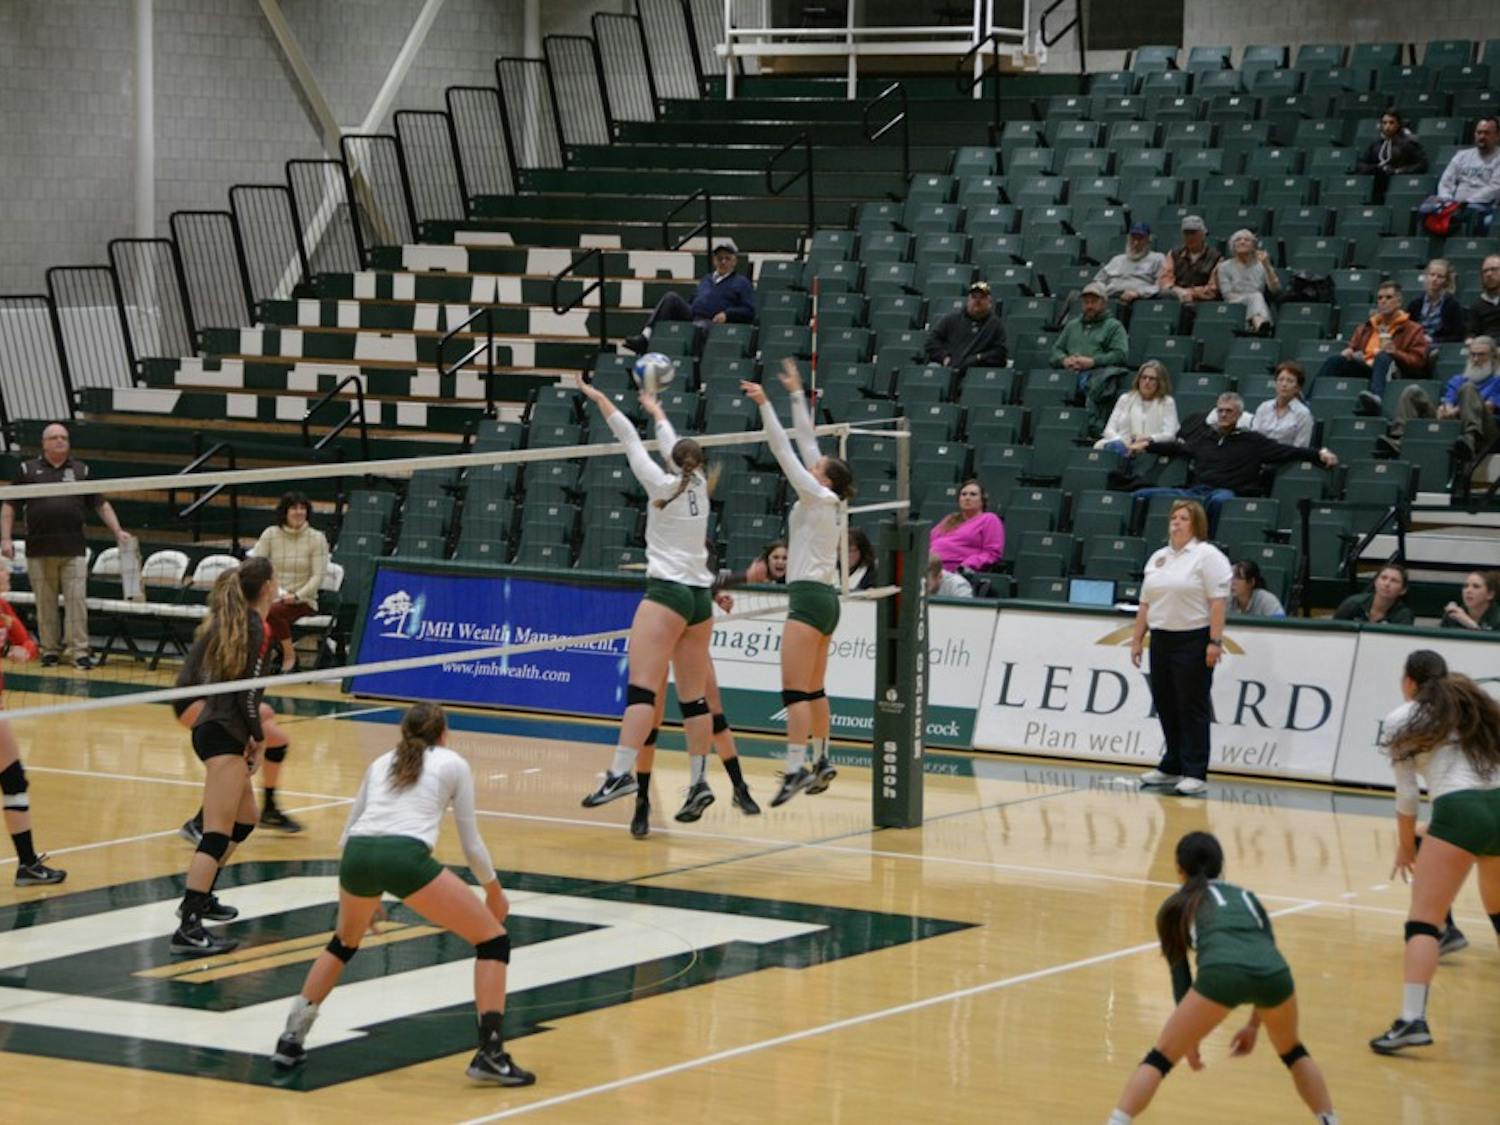 This year, Dartmouth volleyball has added six new players to the team’s roster. The incoming class of 2022 features players who have impressive resumes and excel both on and off the court.